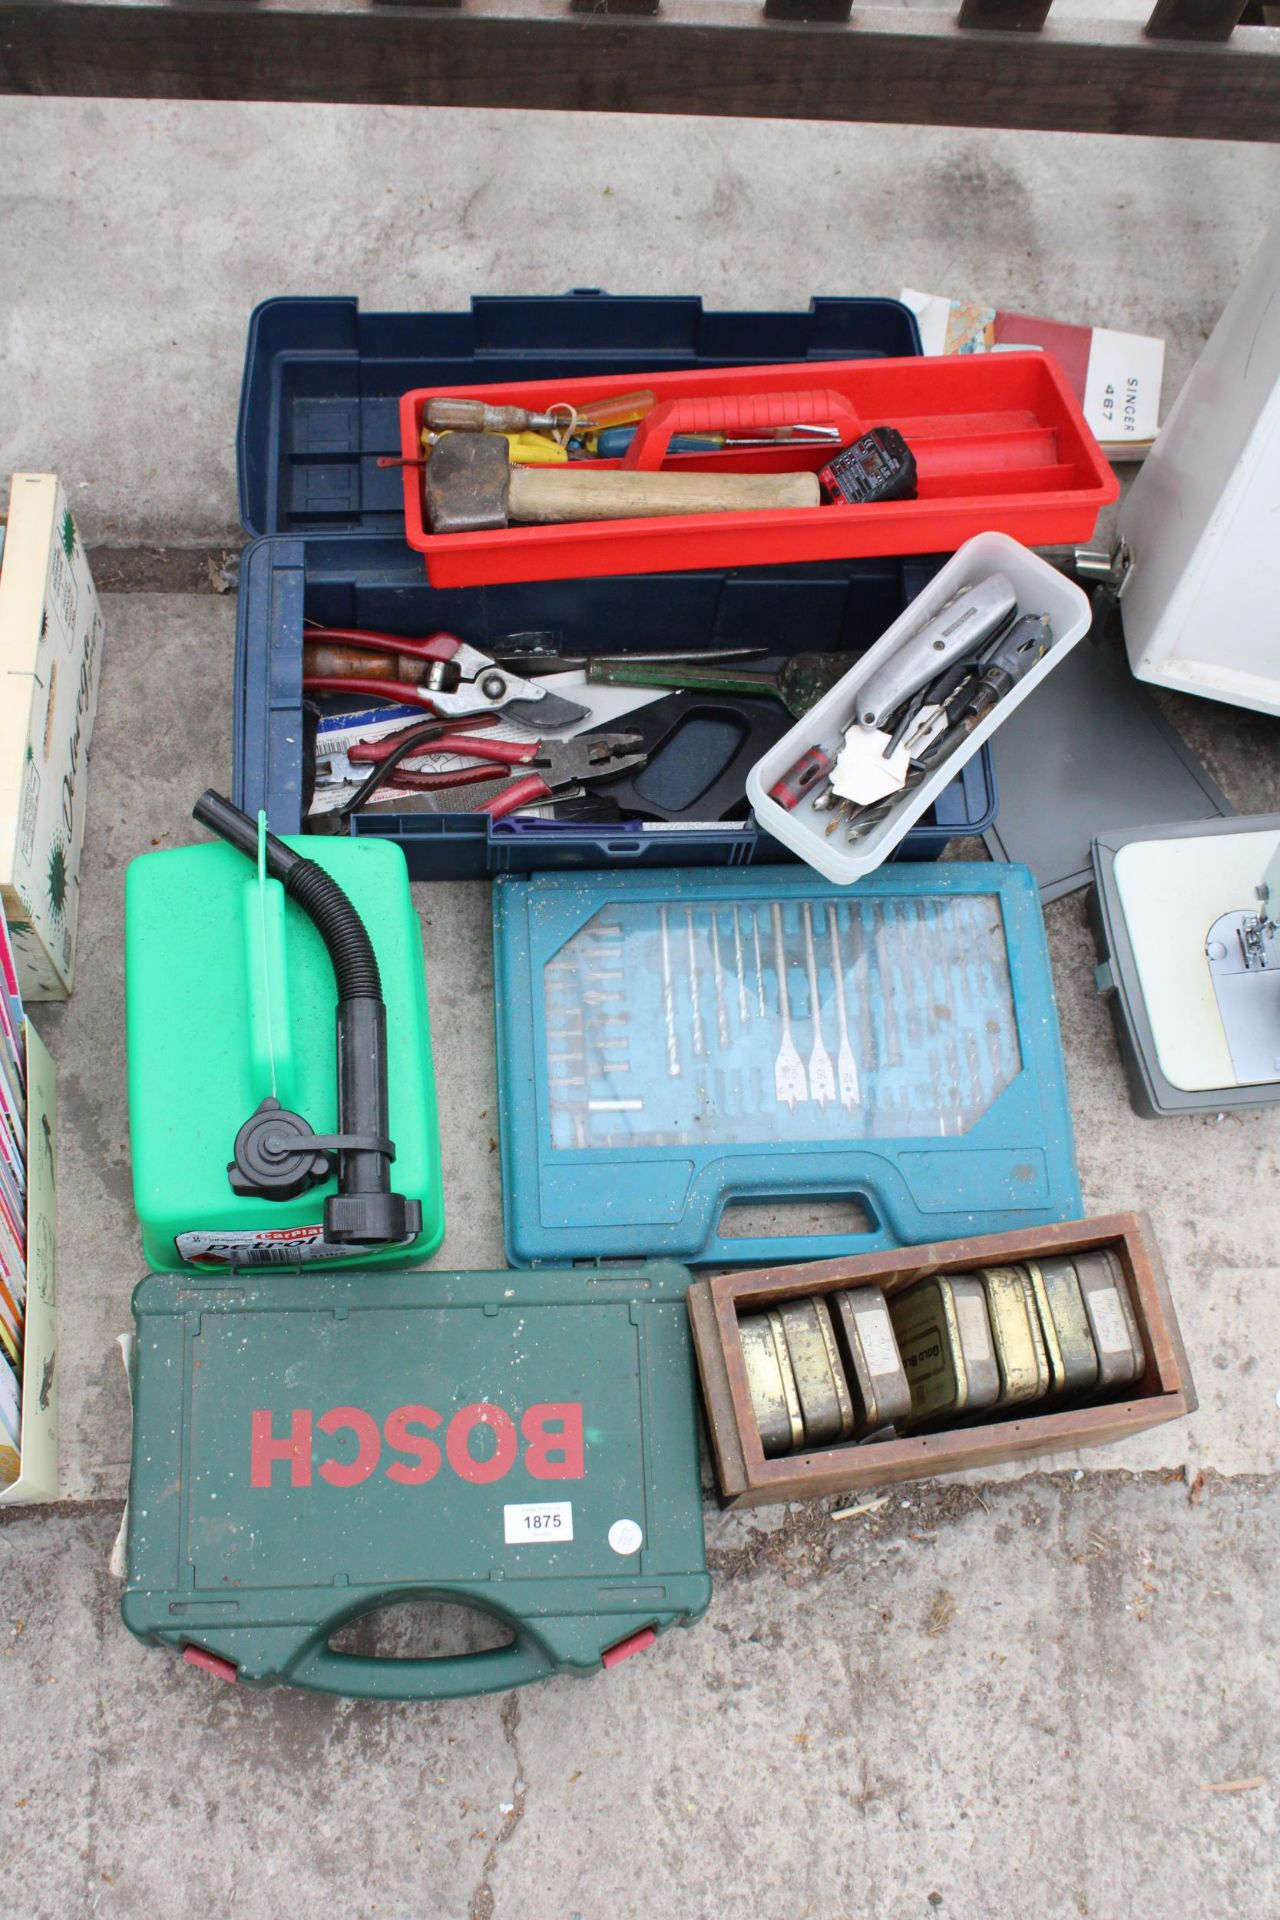 AN ASSORTMENT OF TOOLS TO INCLUDE A BOSCH DRILL, A DRILL BIT SET AND A TOOL BOX WITH AN ASSORTMENT - Image 2 of 4